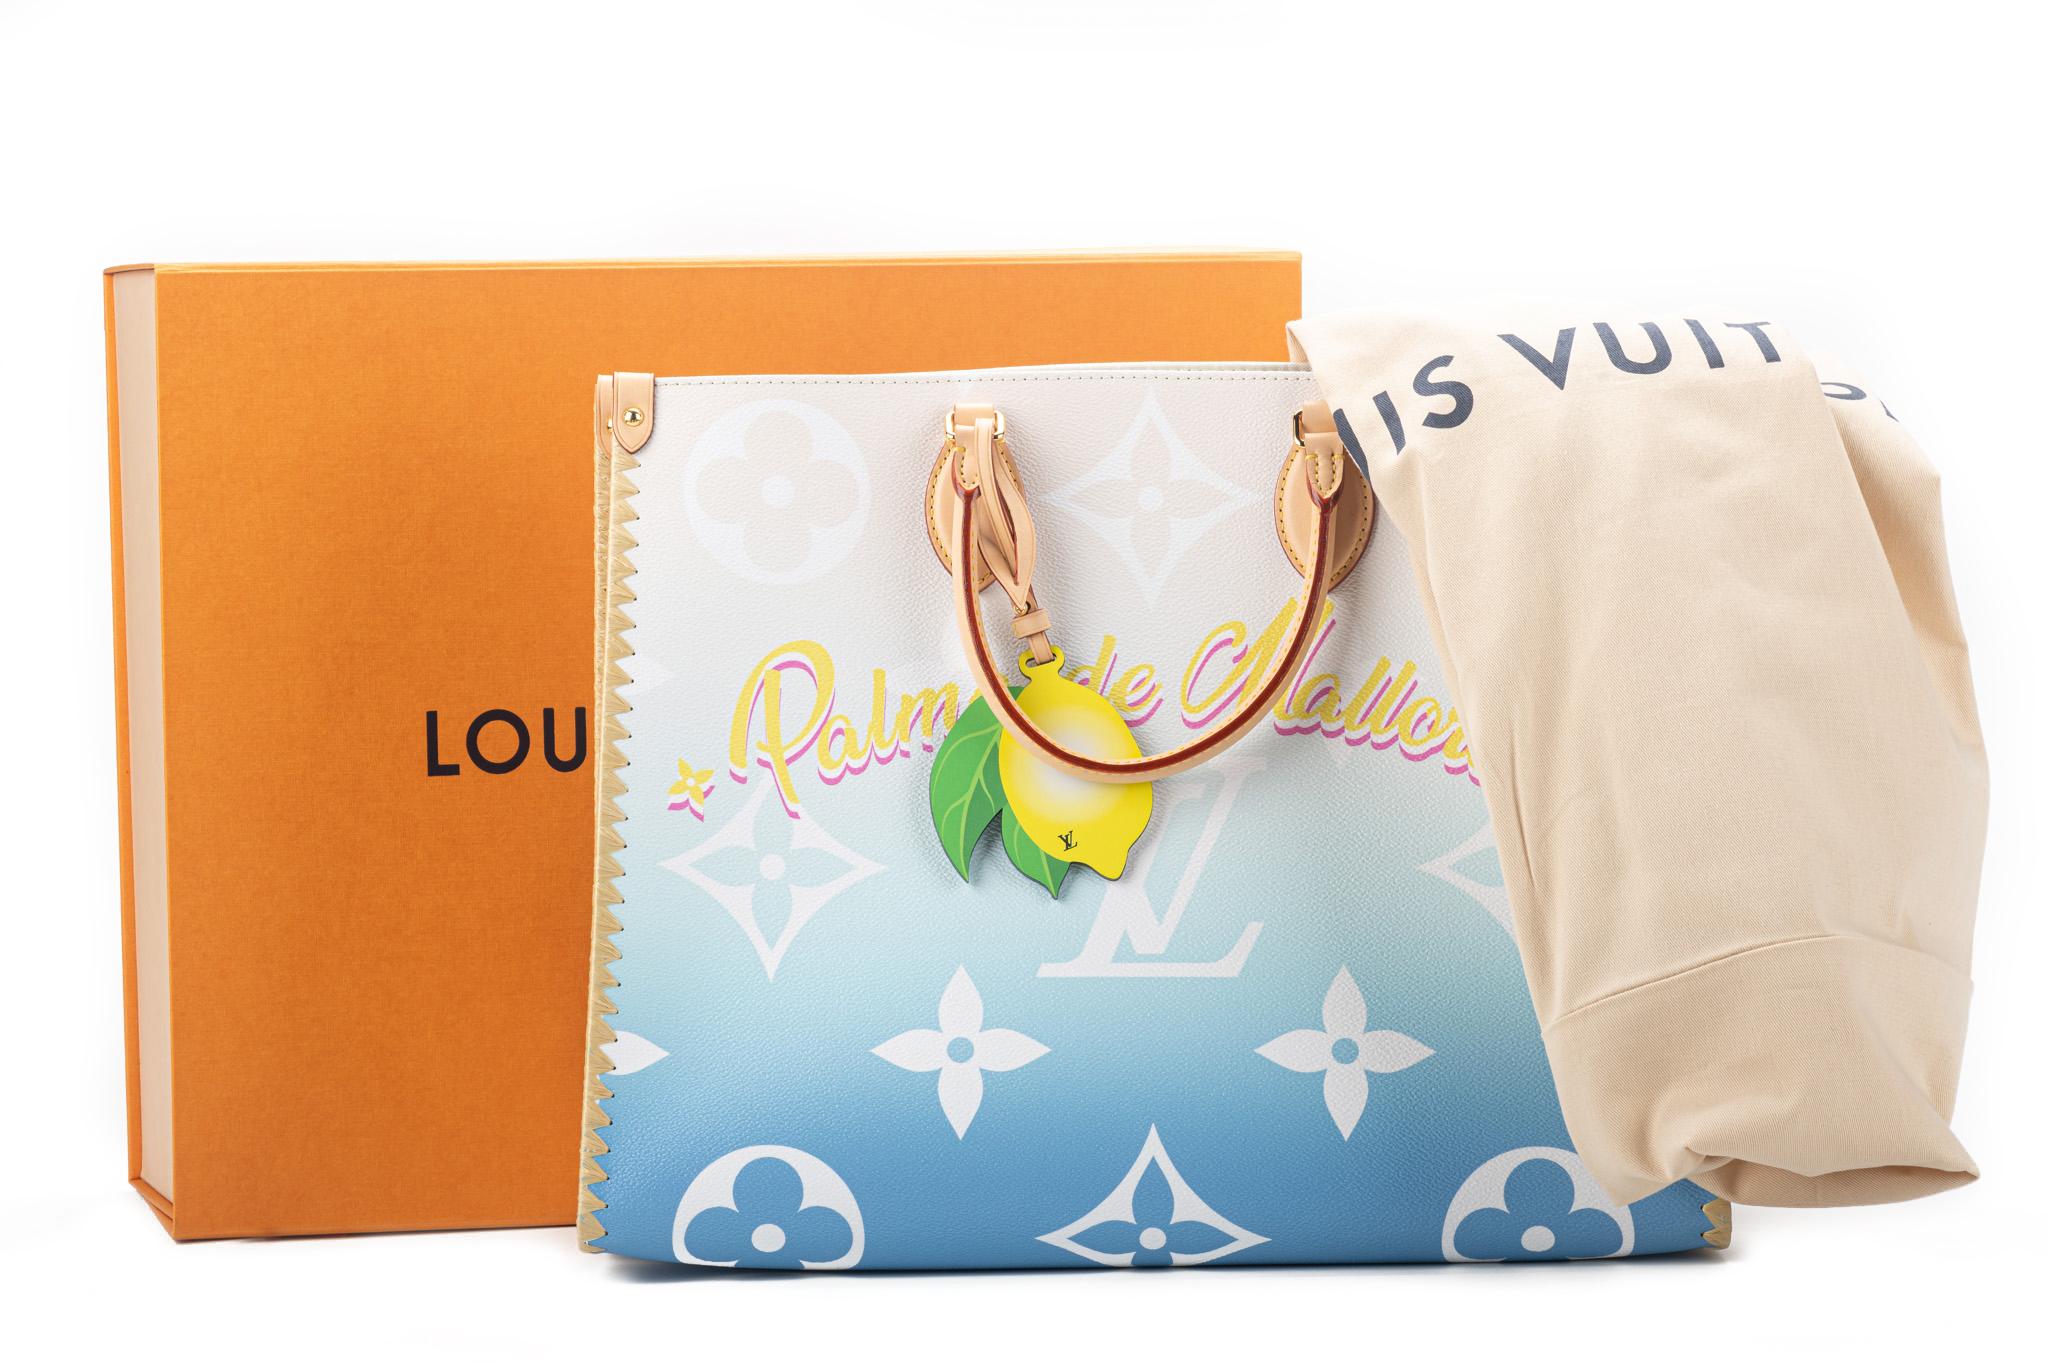 Louis Vuitton 2021 limited edition Summer collection. Palma de Mallorca ultra limited VIP edition. Brand new in box with original dust cover. Large on the go in ombre pink monogram canvas. Sides are made of raffia, cowhide trims and straps, lemon